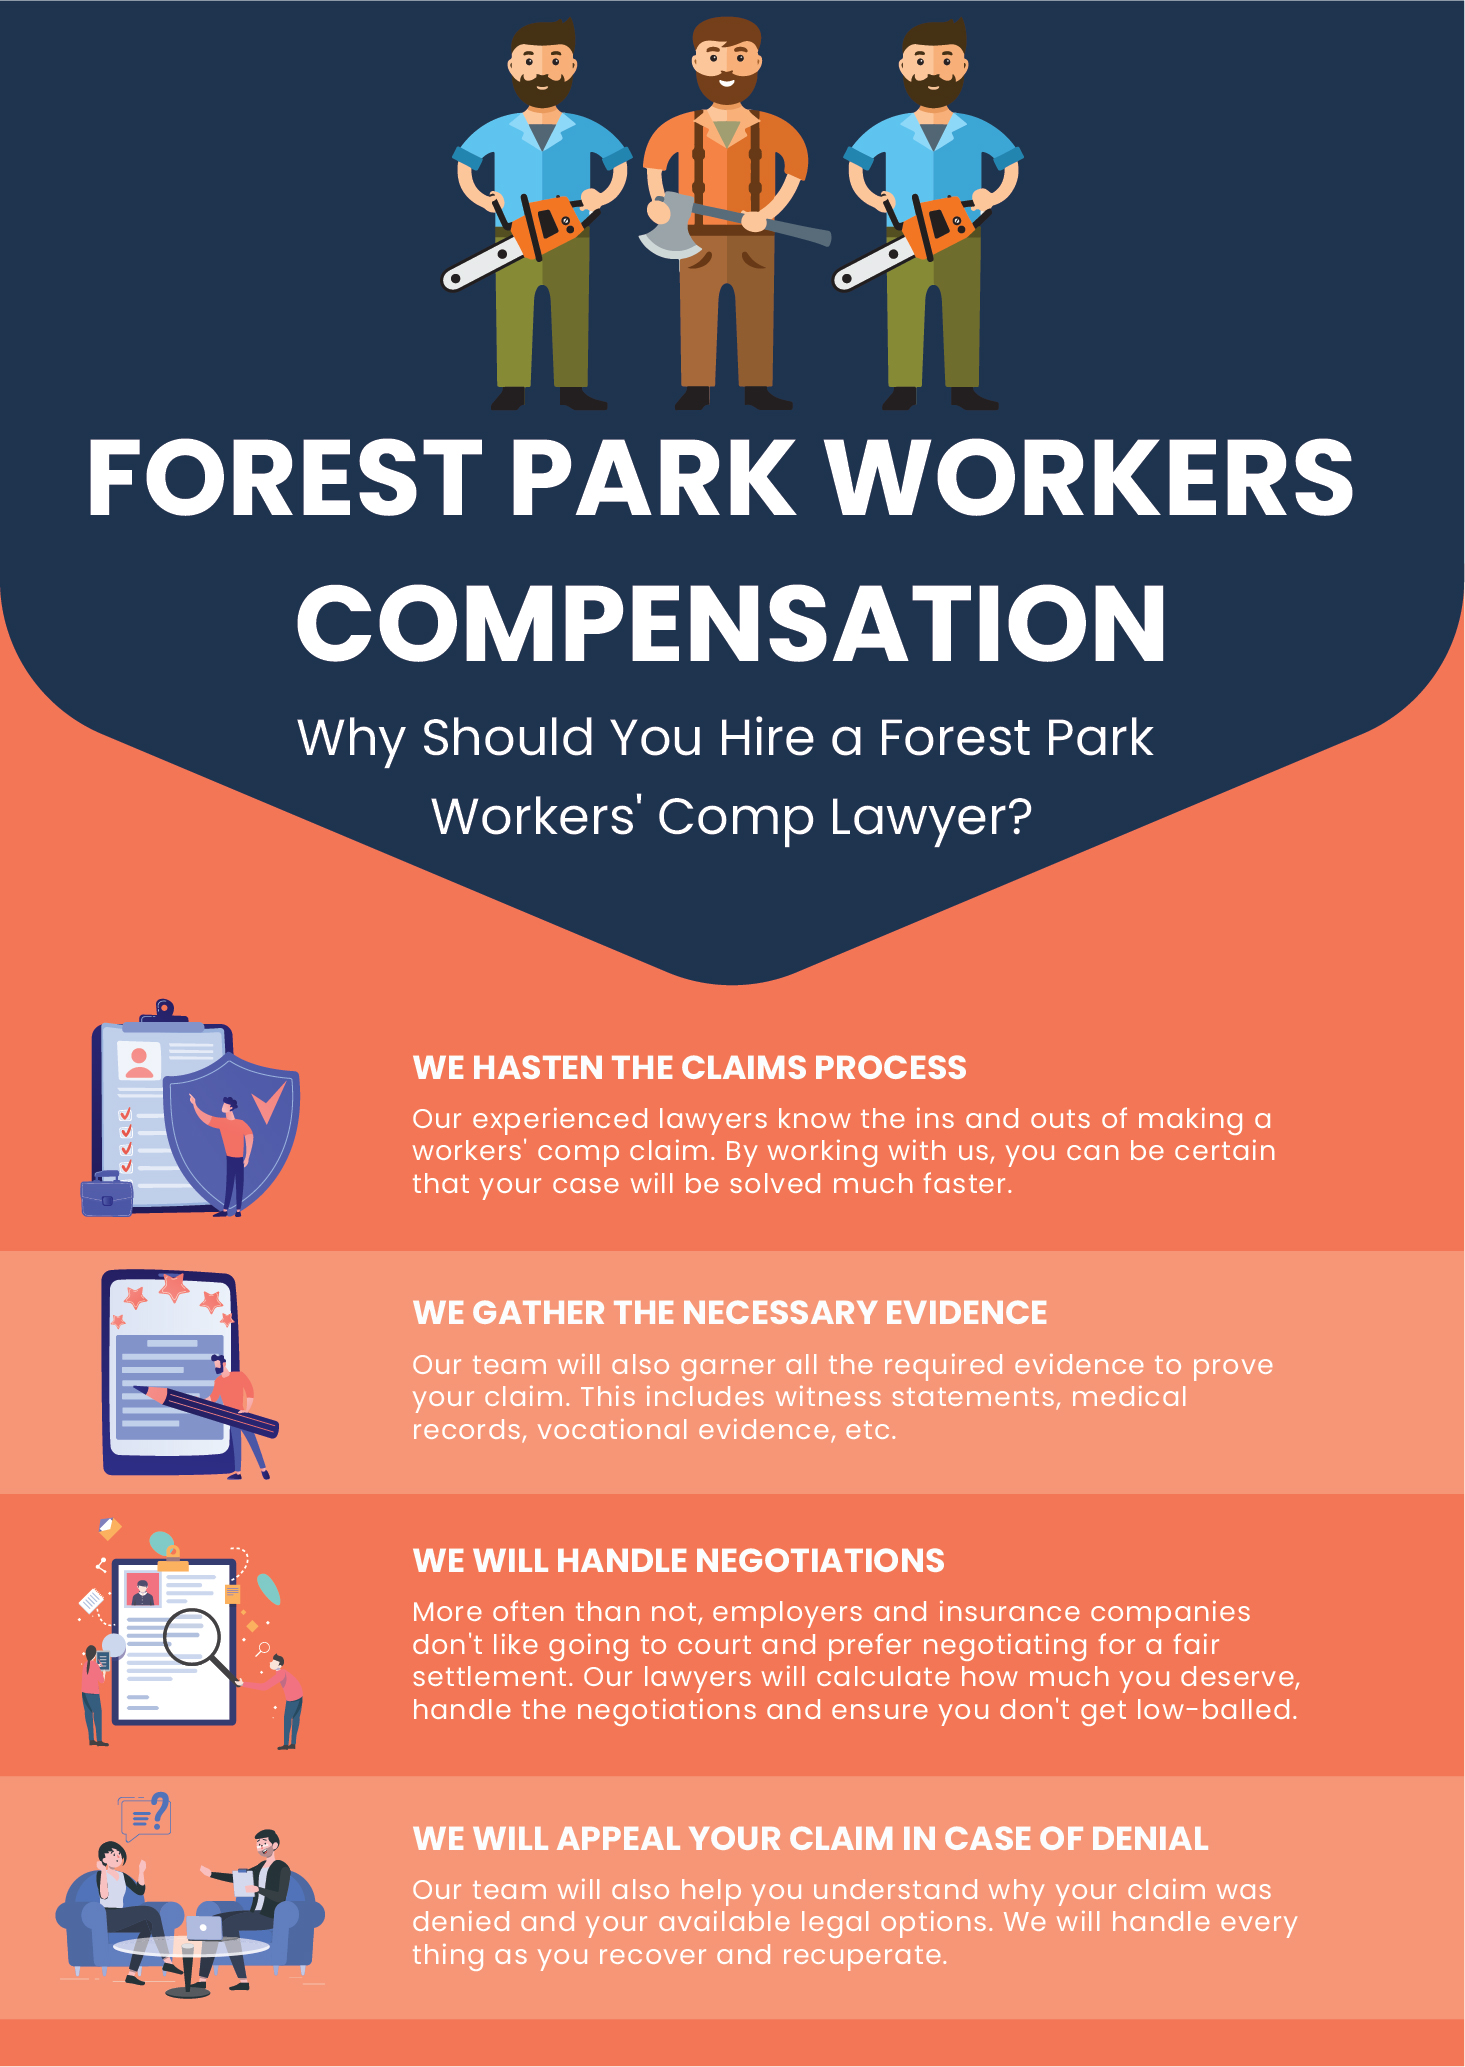 Forest Park Workers Compensation Infographic